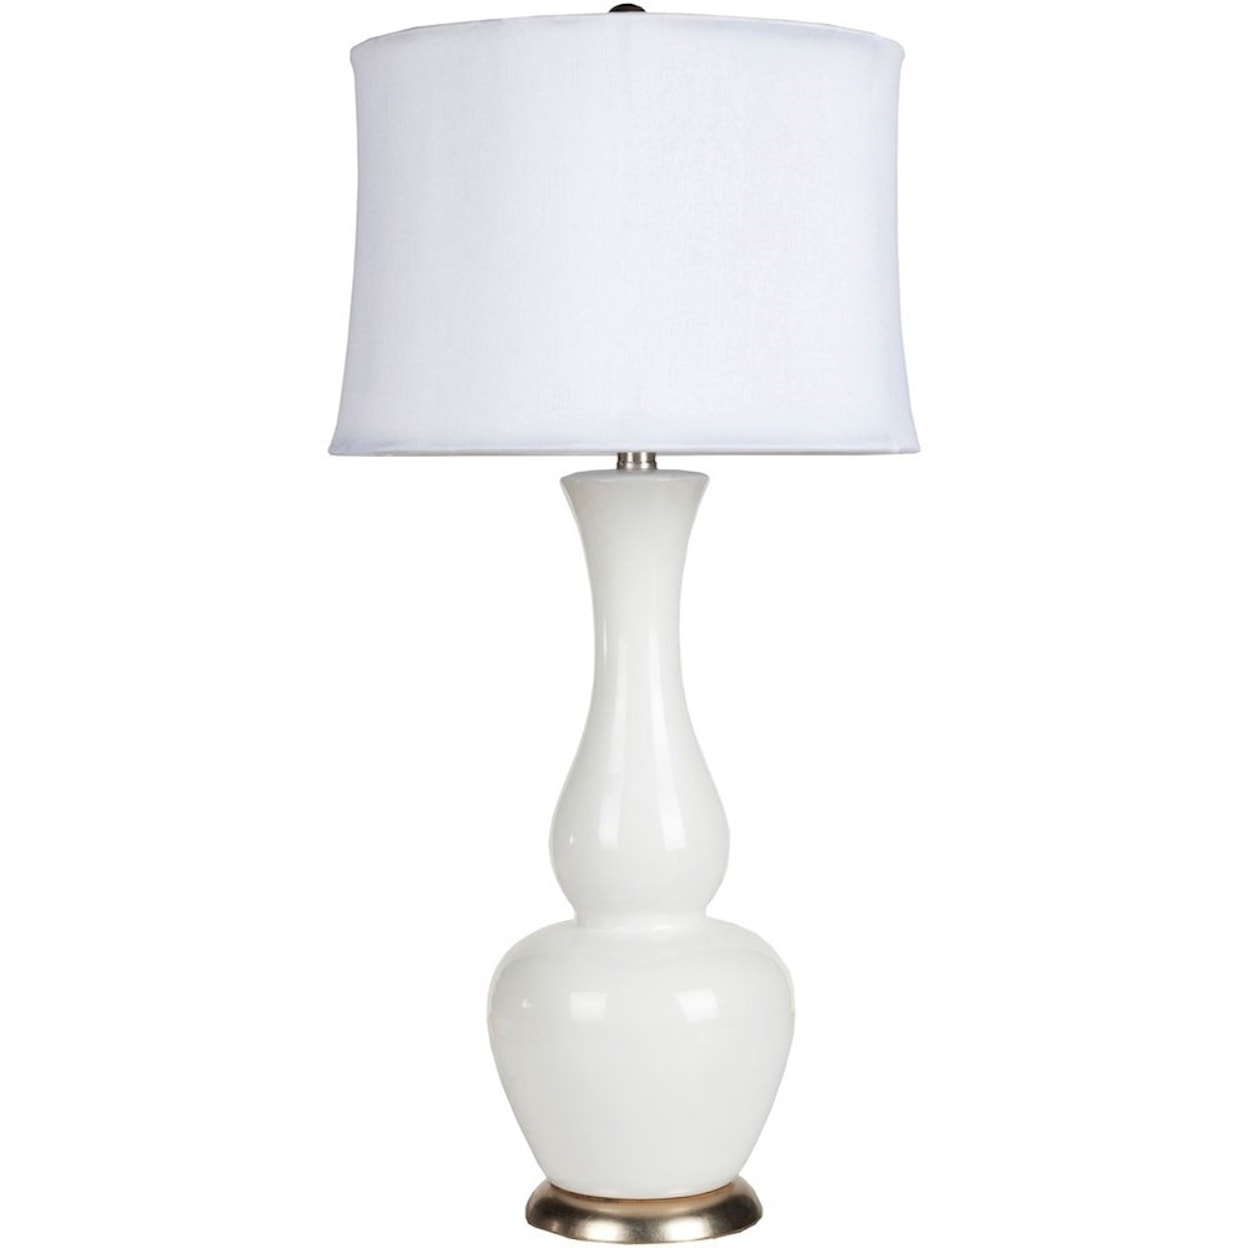 Surya Lamps Ivory White Global Table Lamp